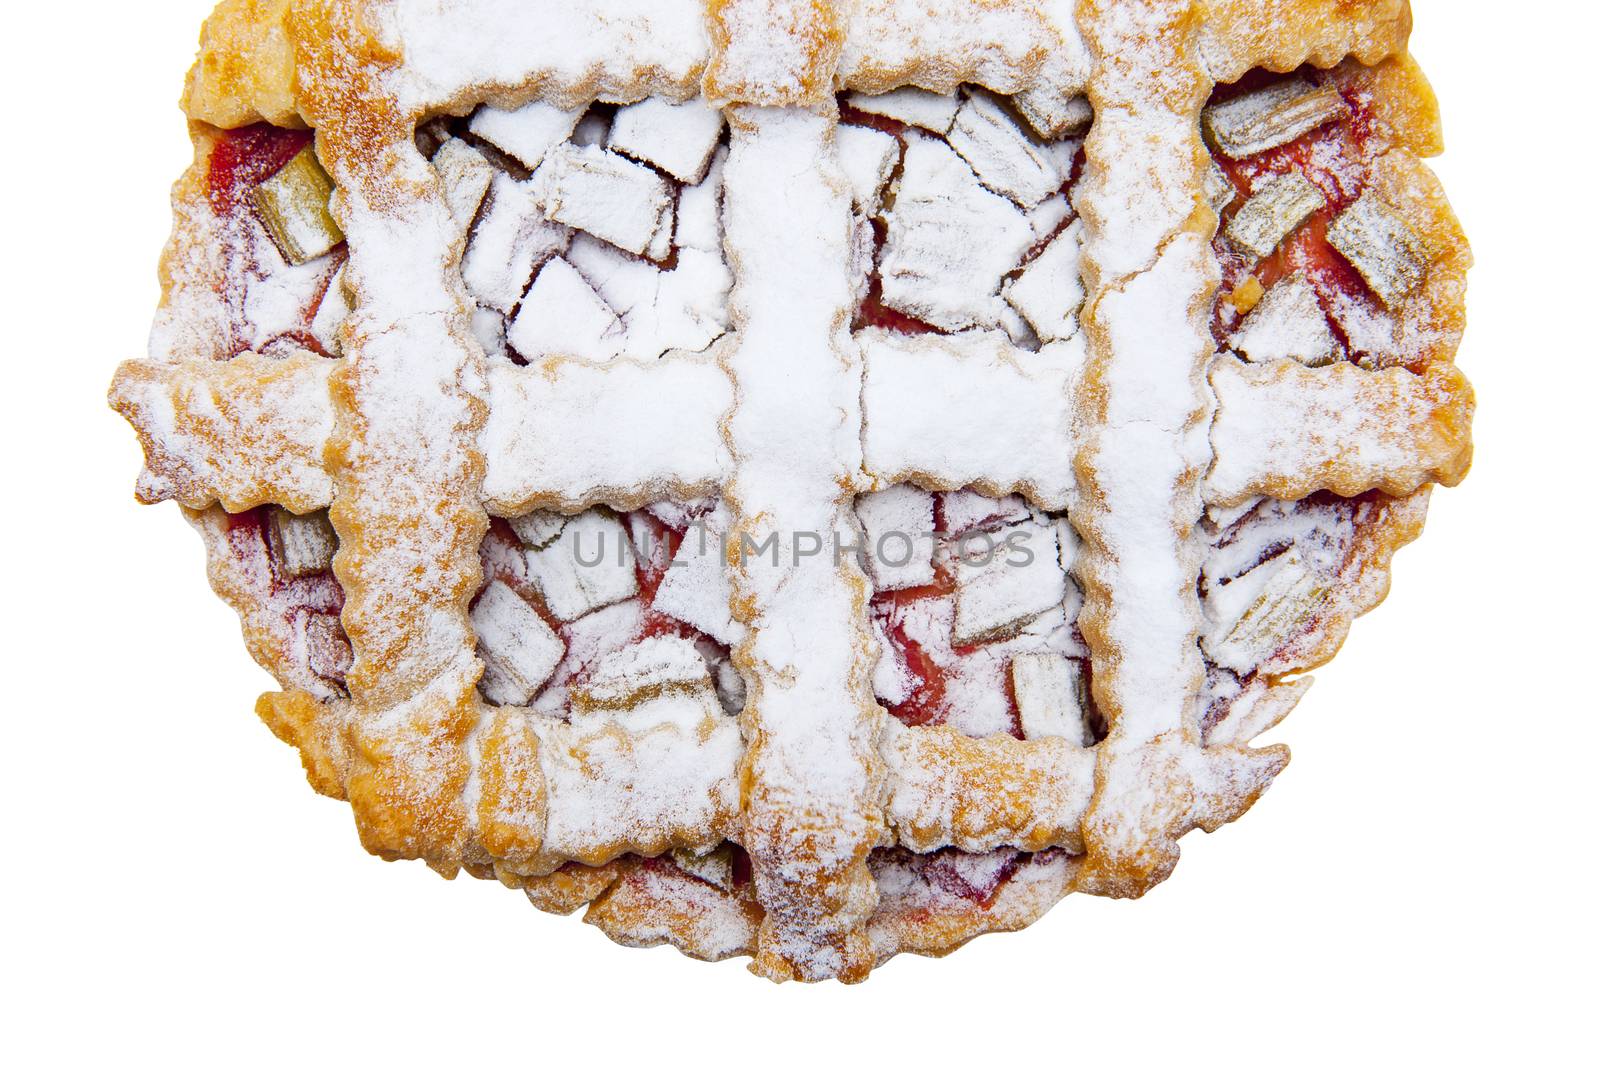 Tart with rhubarb isolated on the white background by Yaurinko